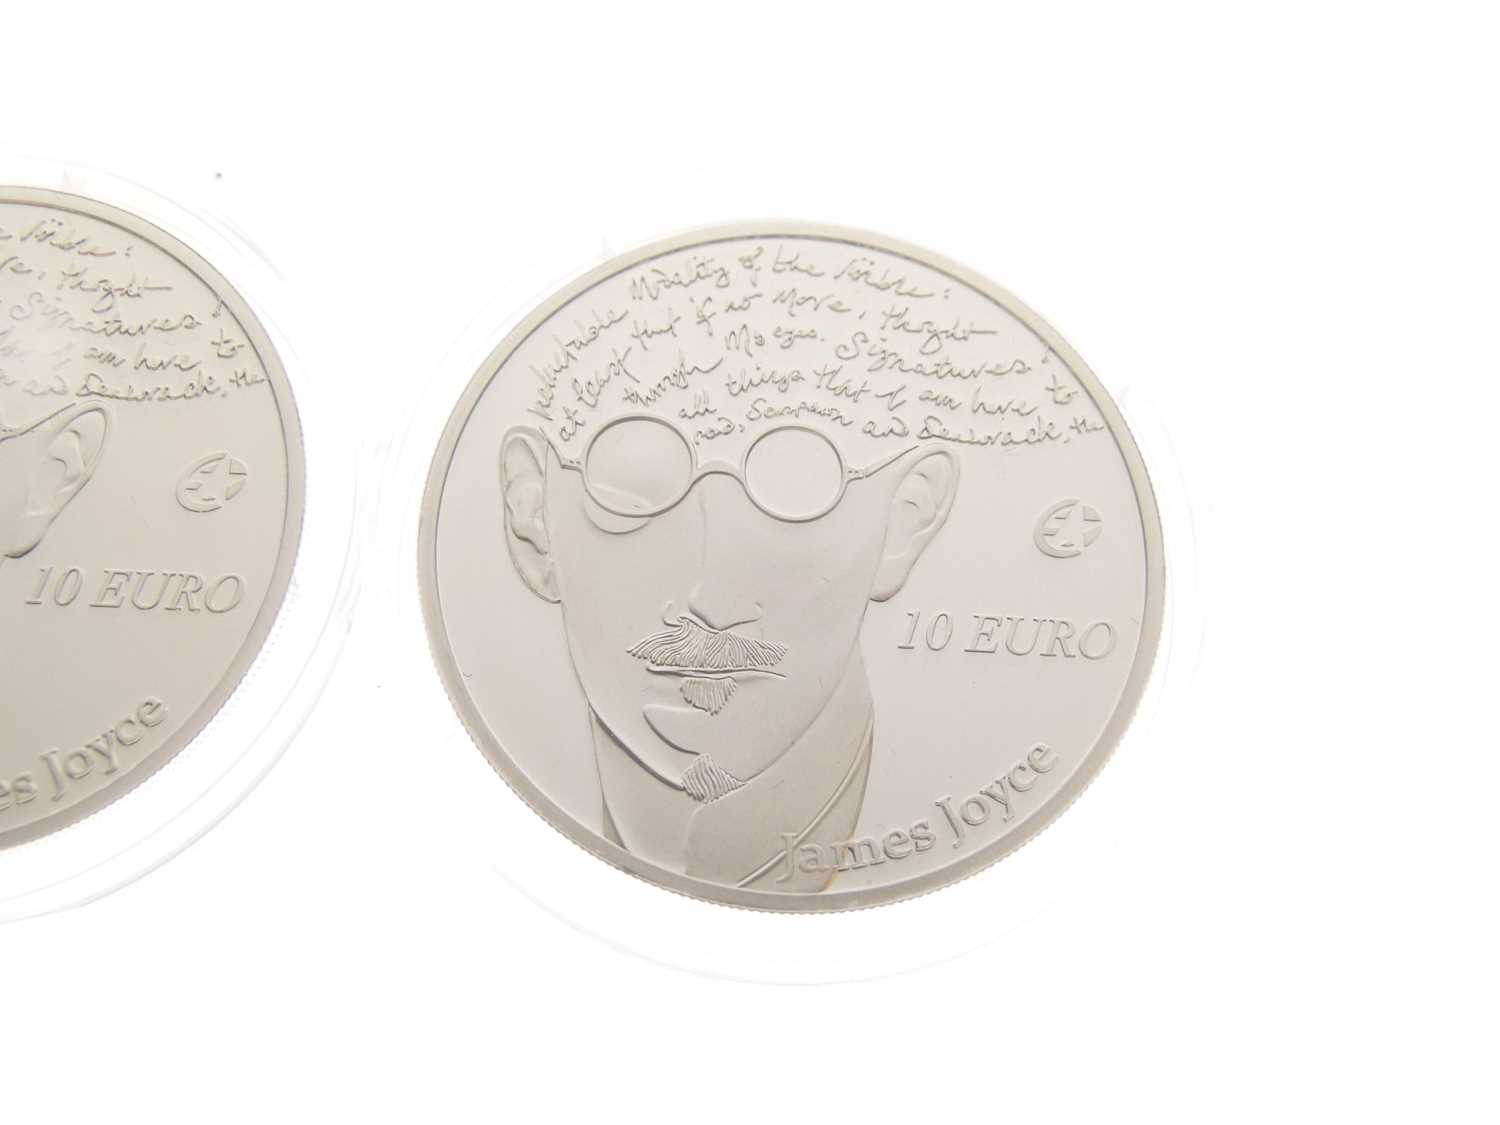 James Joyce 10 Euro silver proof coins - Image 2 of 6